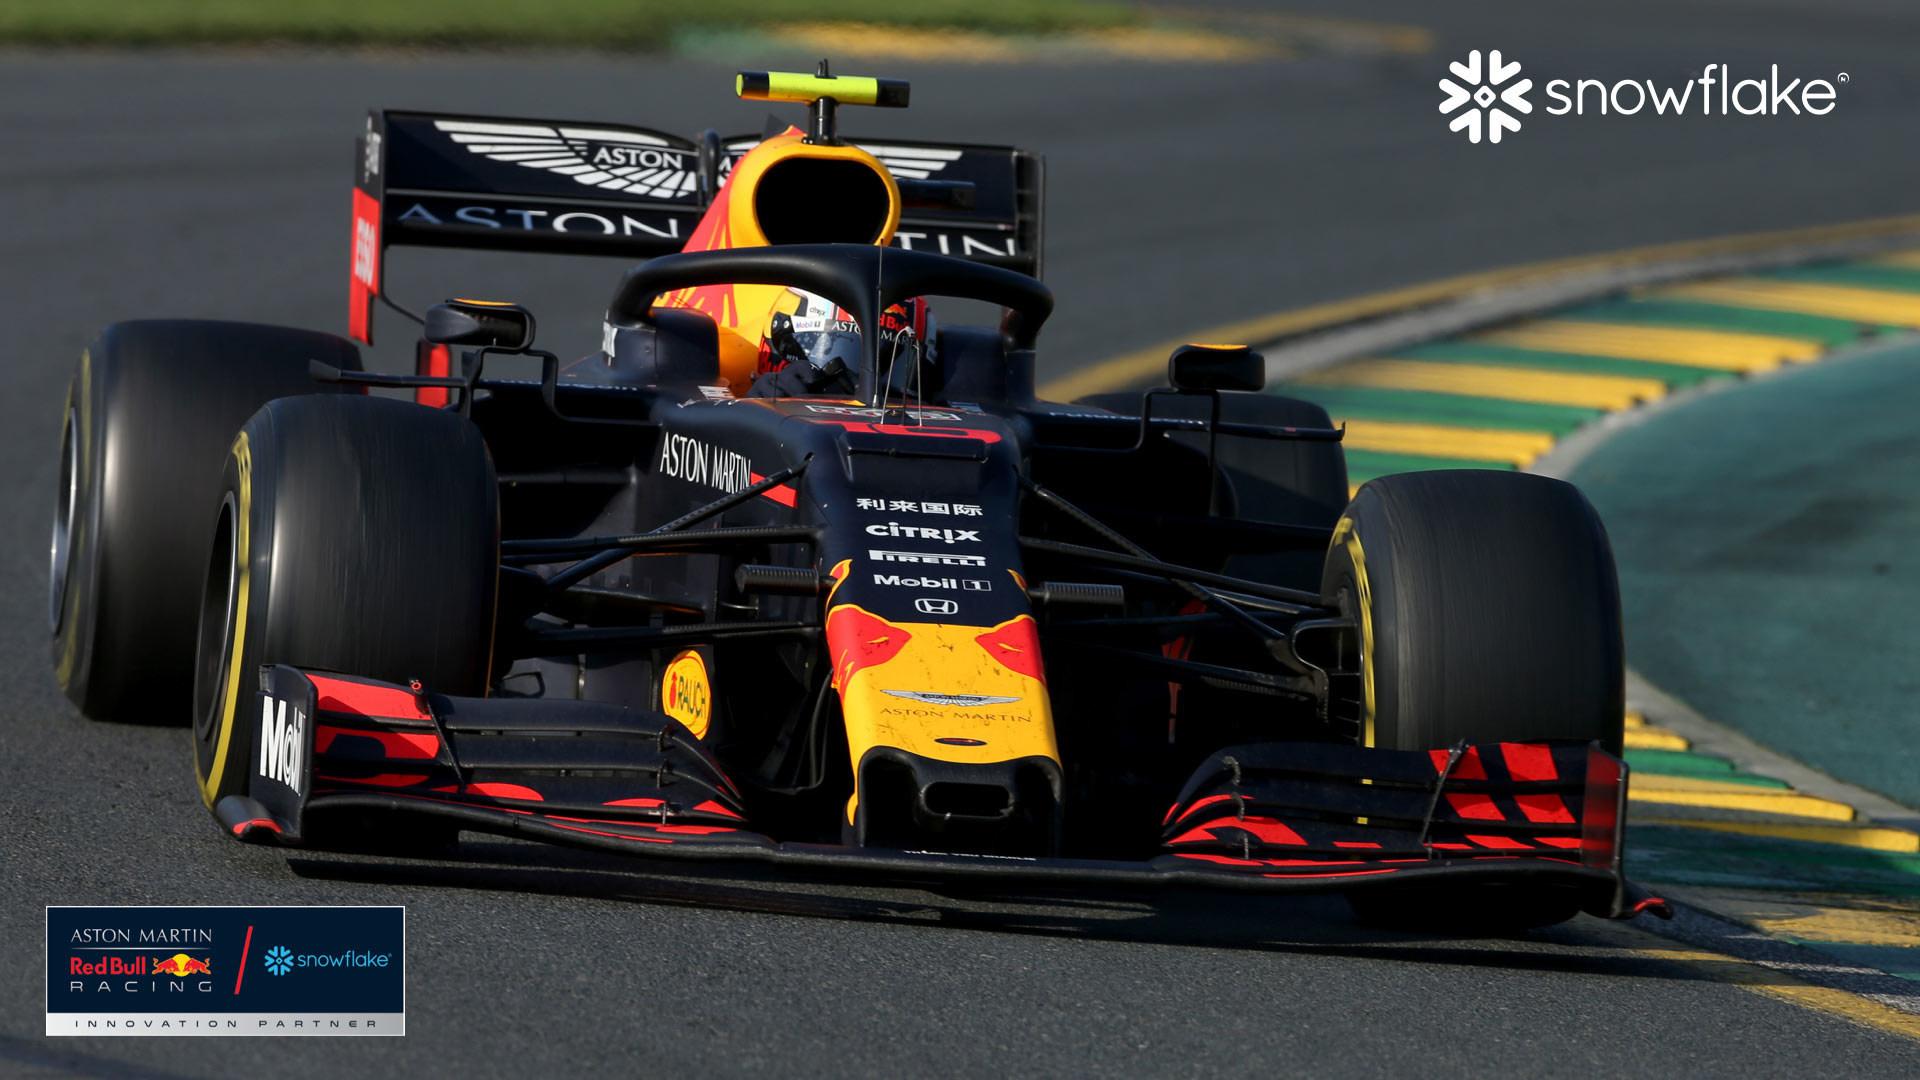 Snowflake and Aston Martin Red Bull Racing Partner to